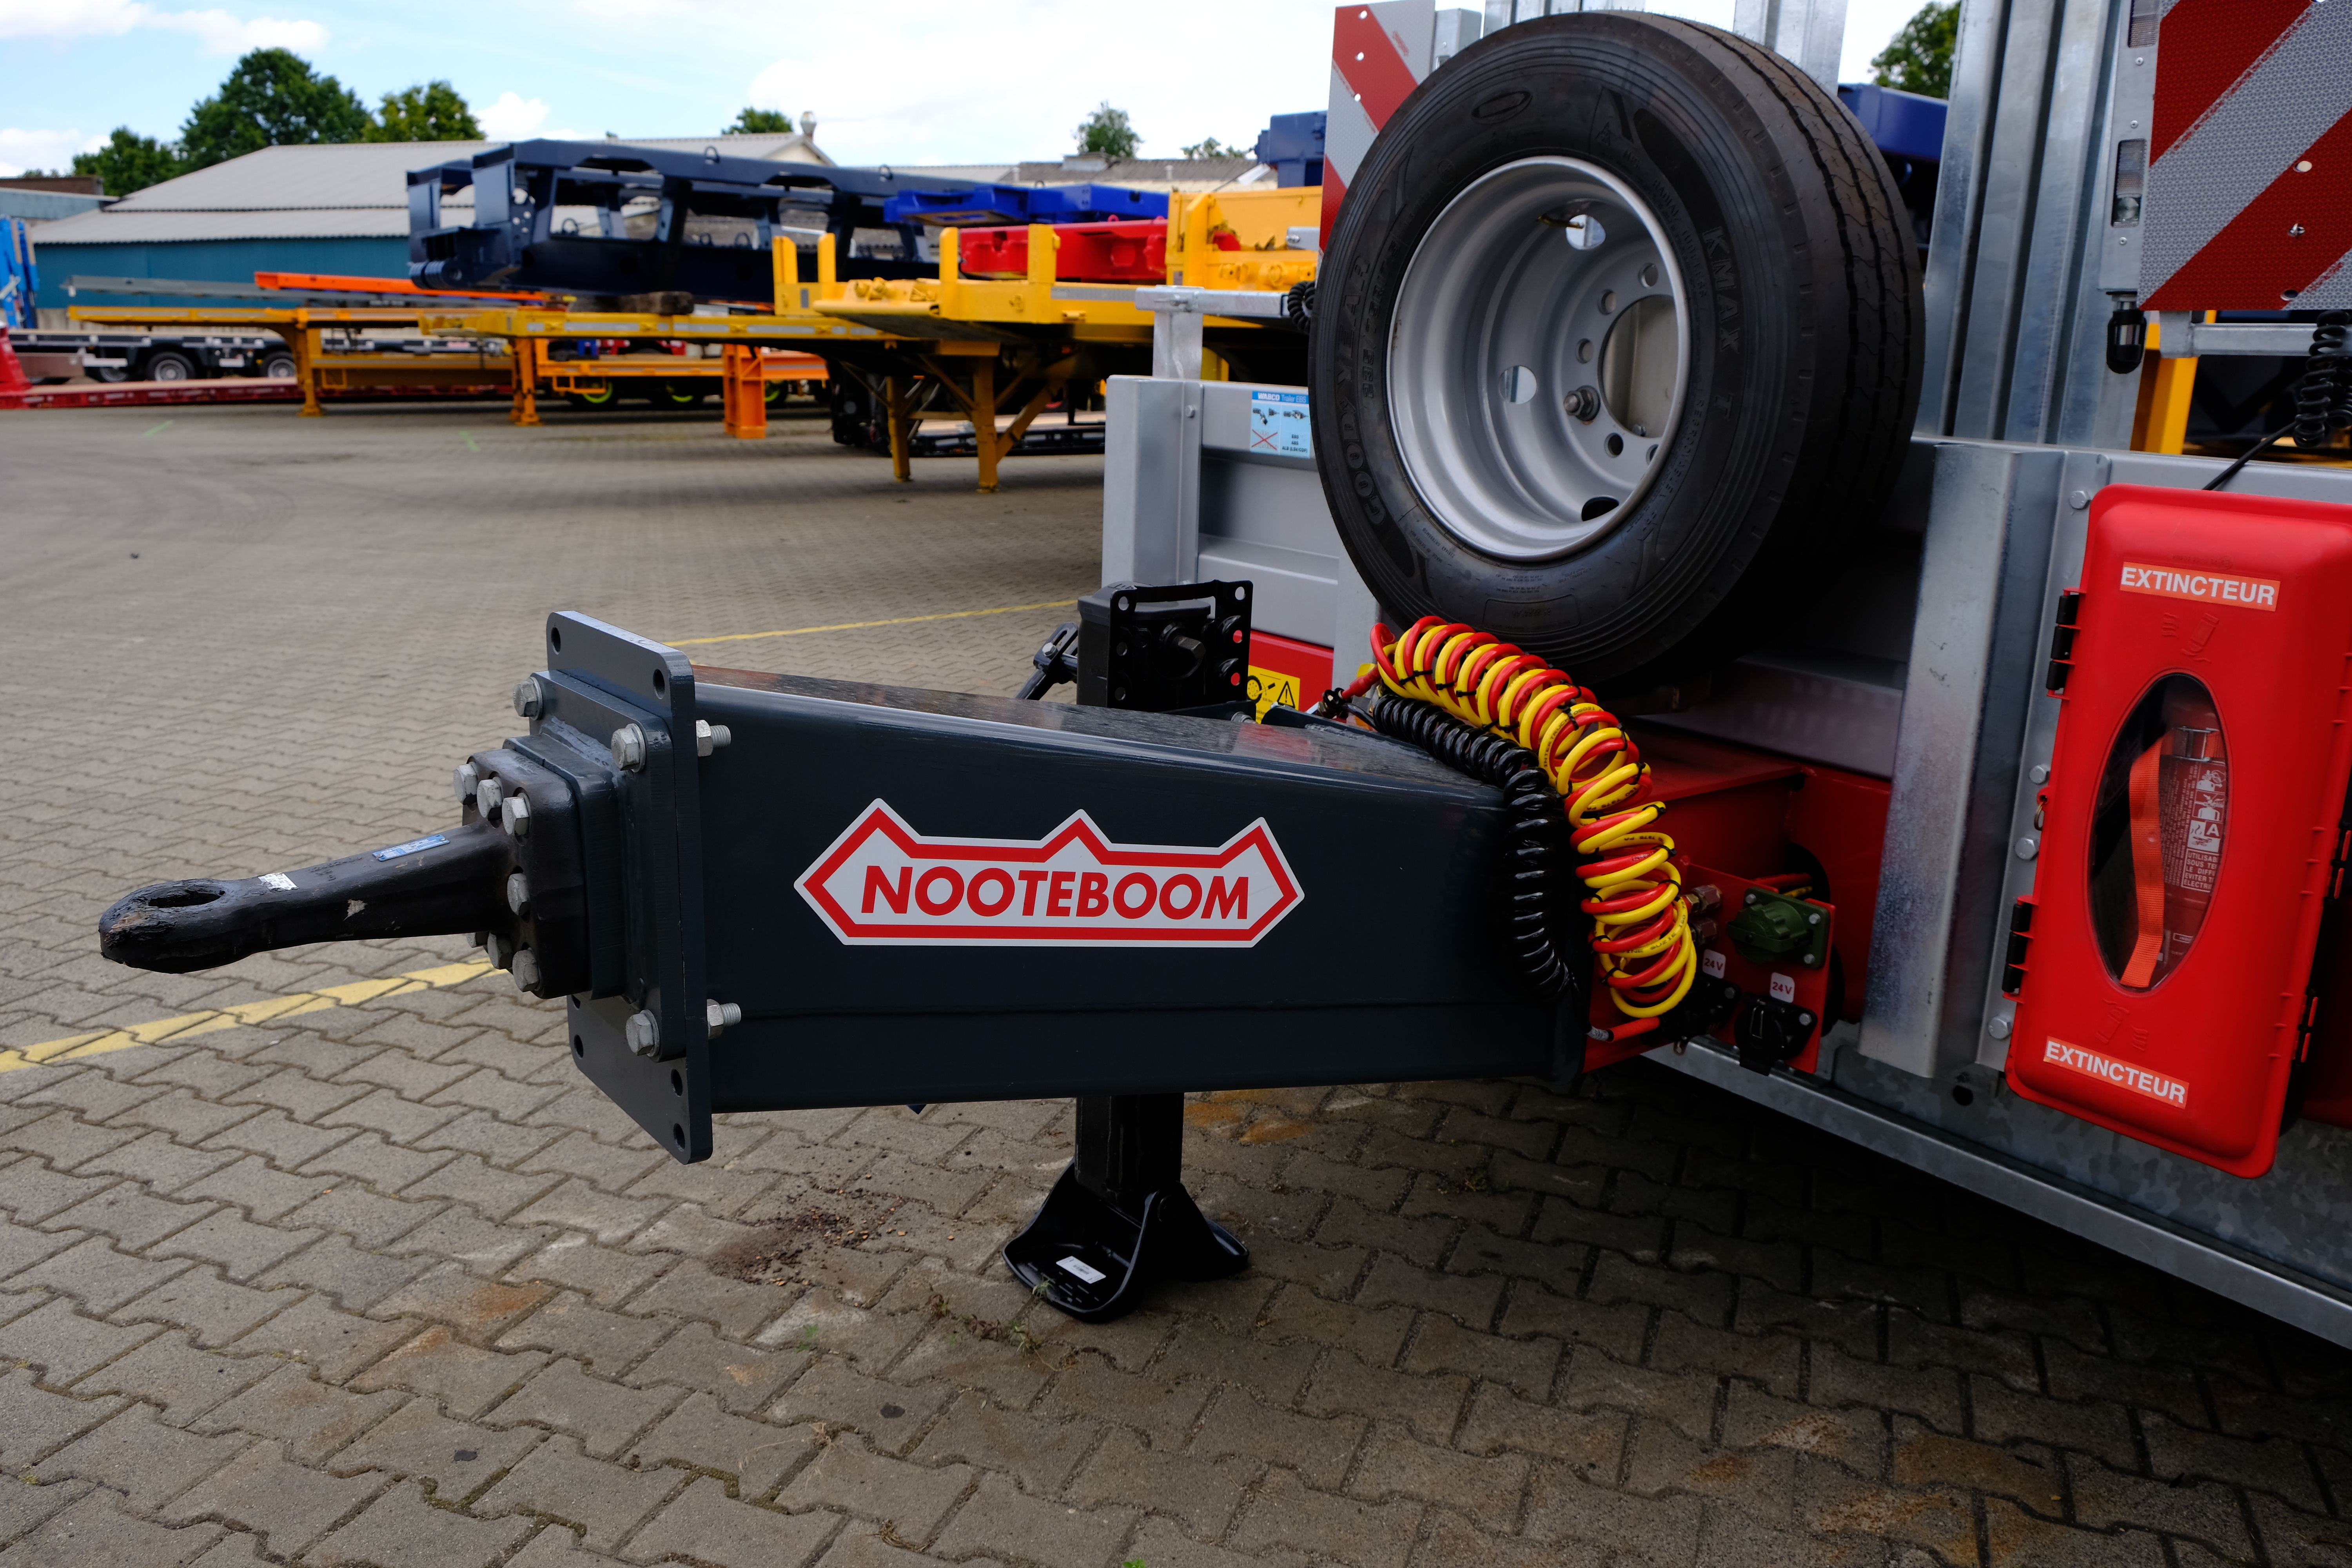 The drawbar is equipped with an interchangeable towing eye and is available in three different diameters